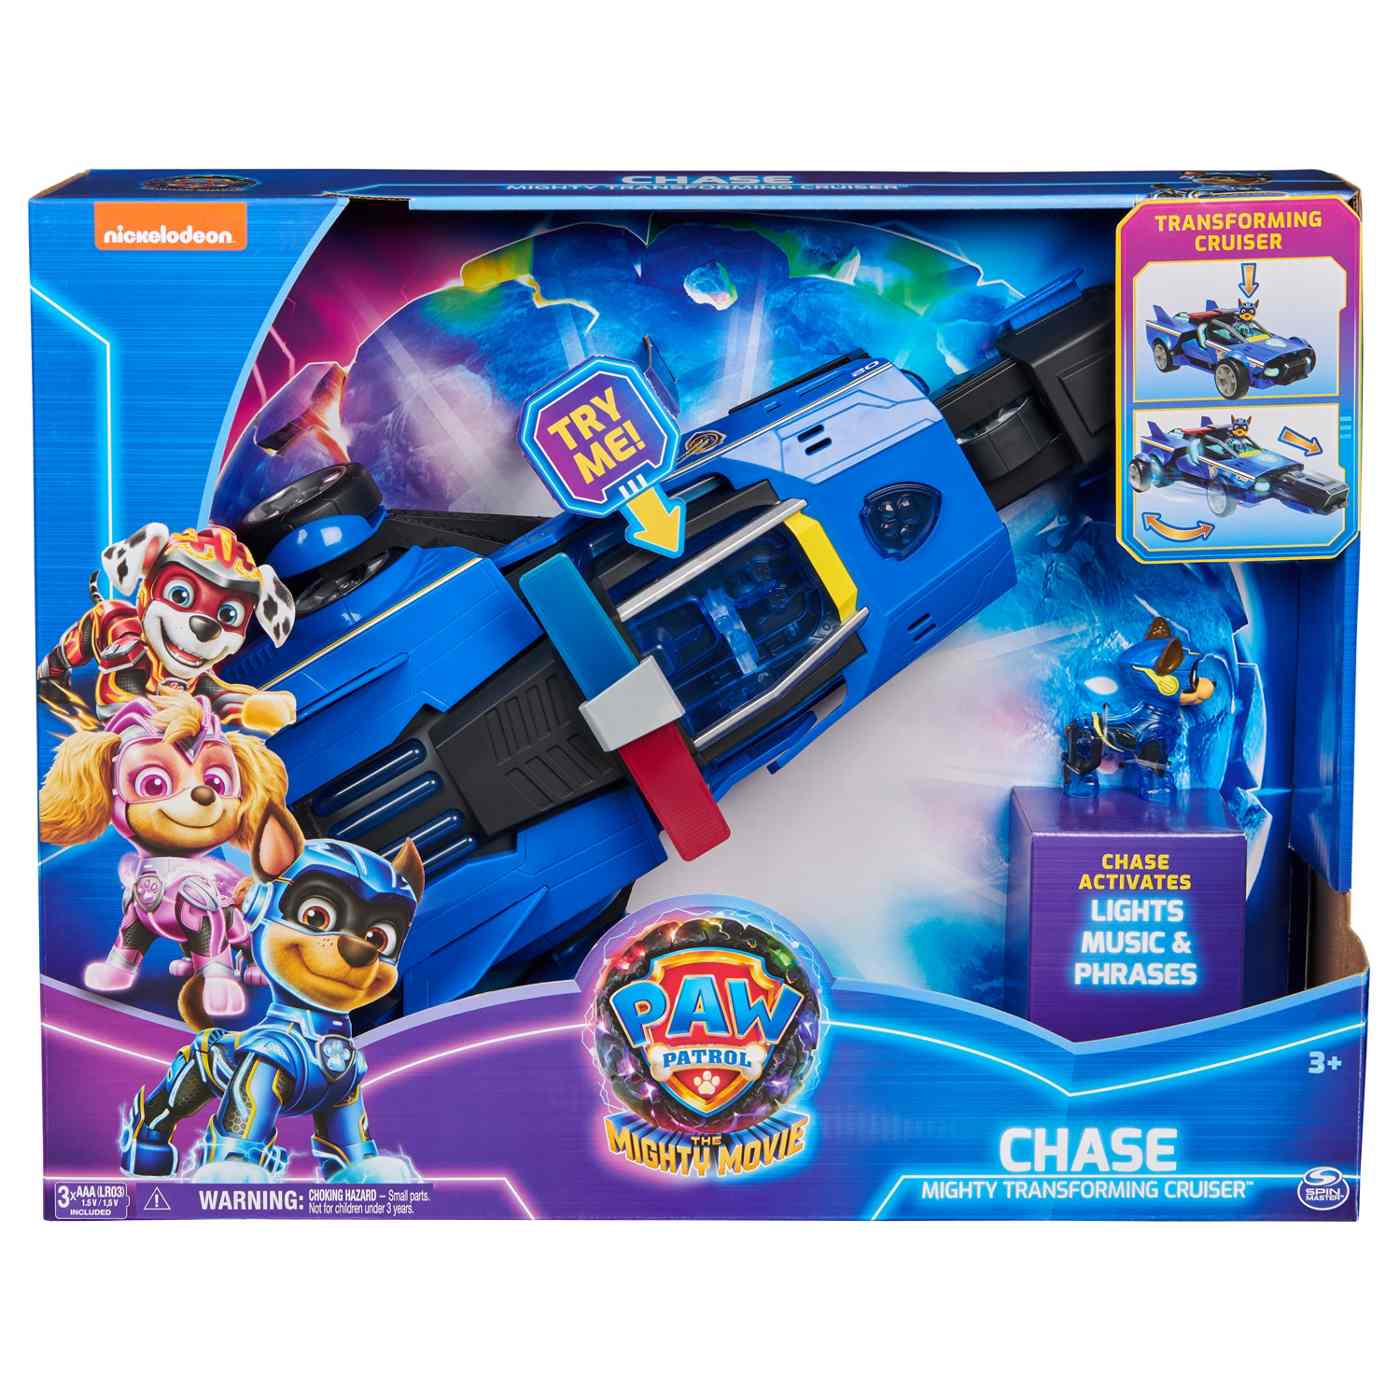 PAW Patrol The Mighty Movie - Pup Squad Transforming Aircraft Carrier HQ  avec Chase et